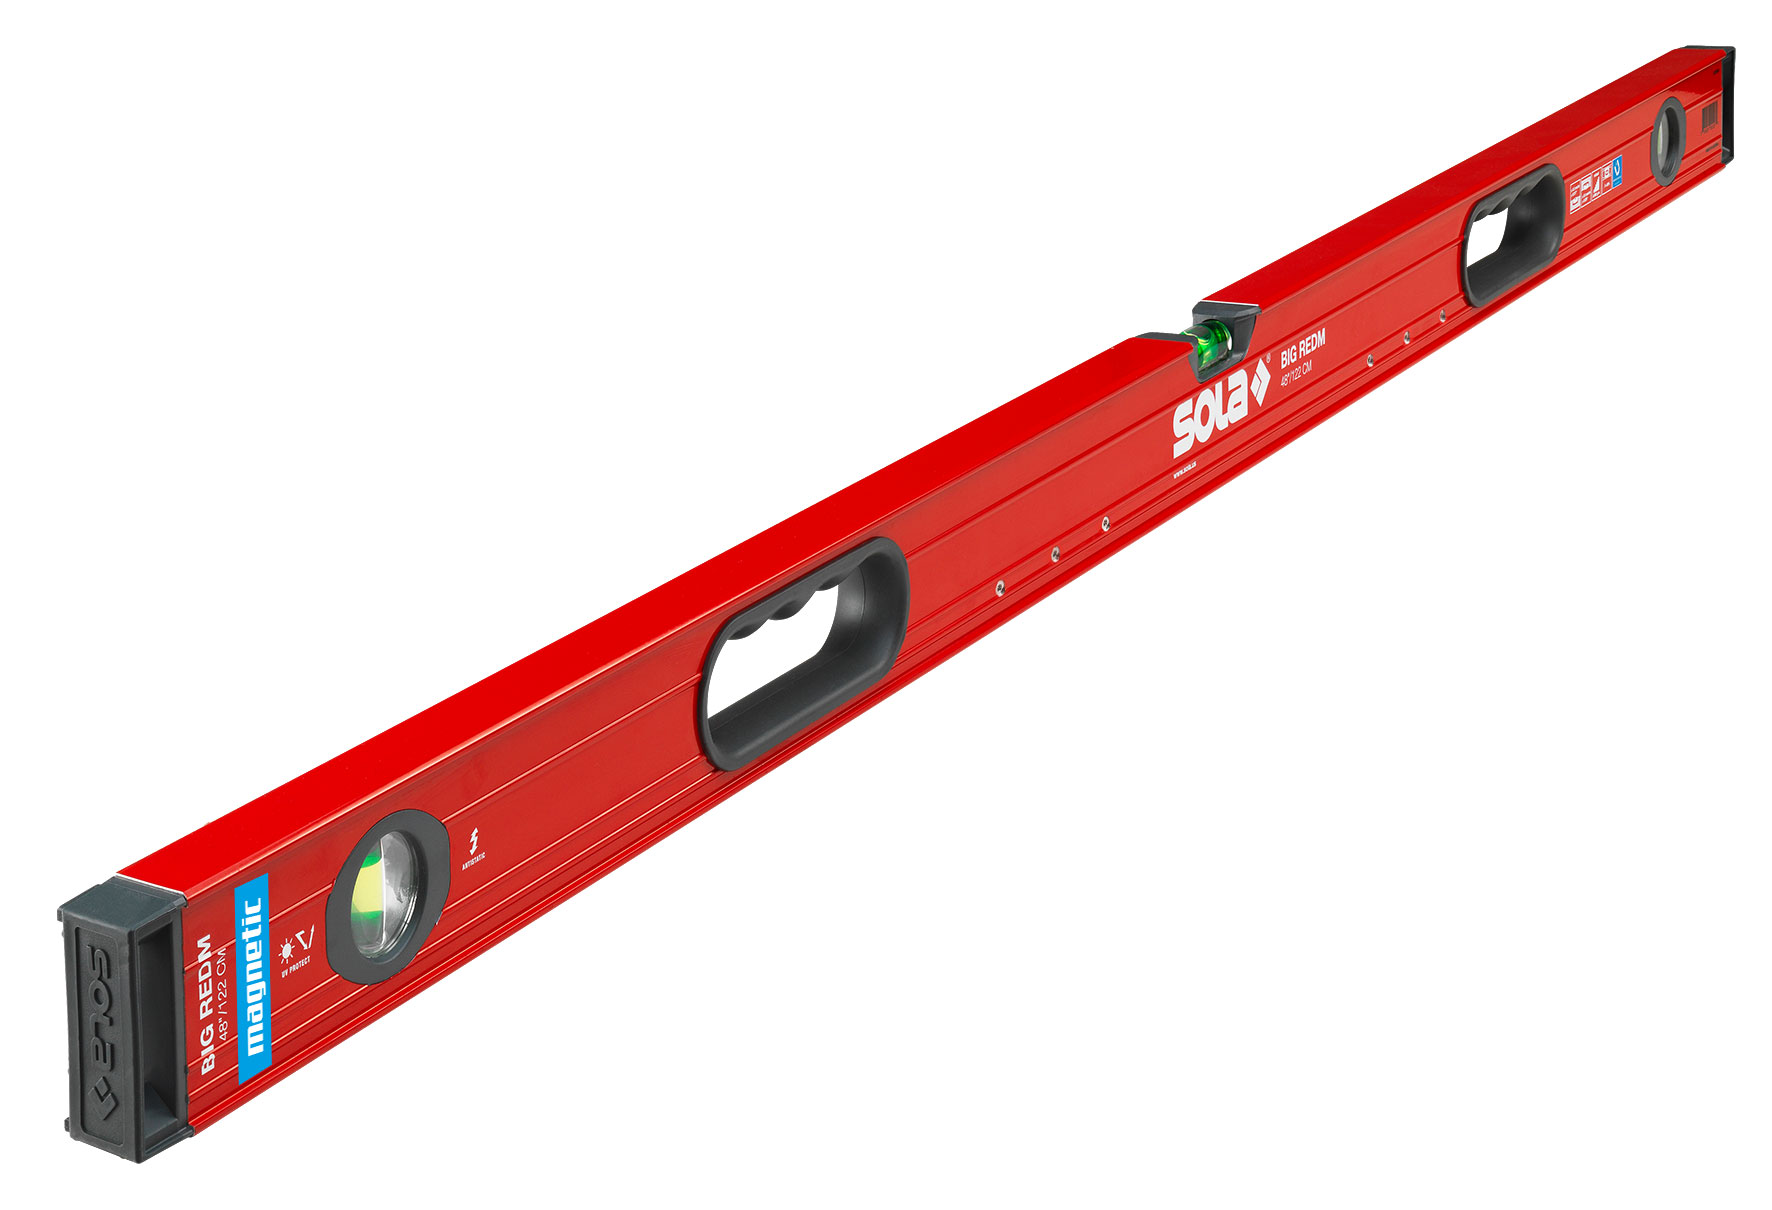 The SOLA magnetic spirit levels BIG REDM with two handles are available in lengths of 36, 48, 59, 72 and 78 inches.